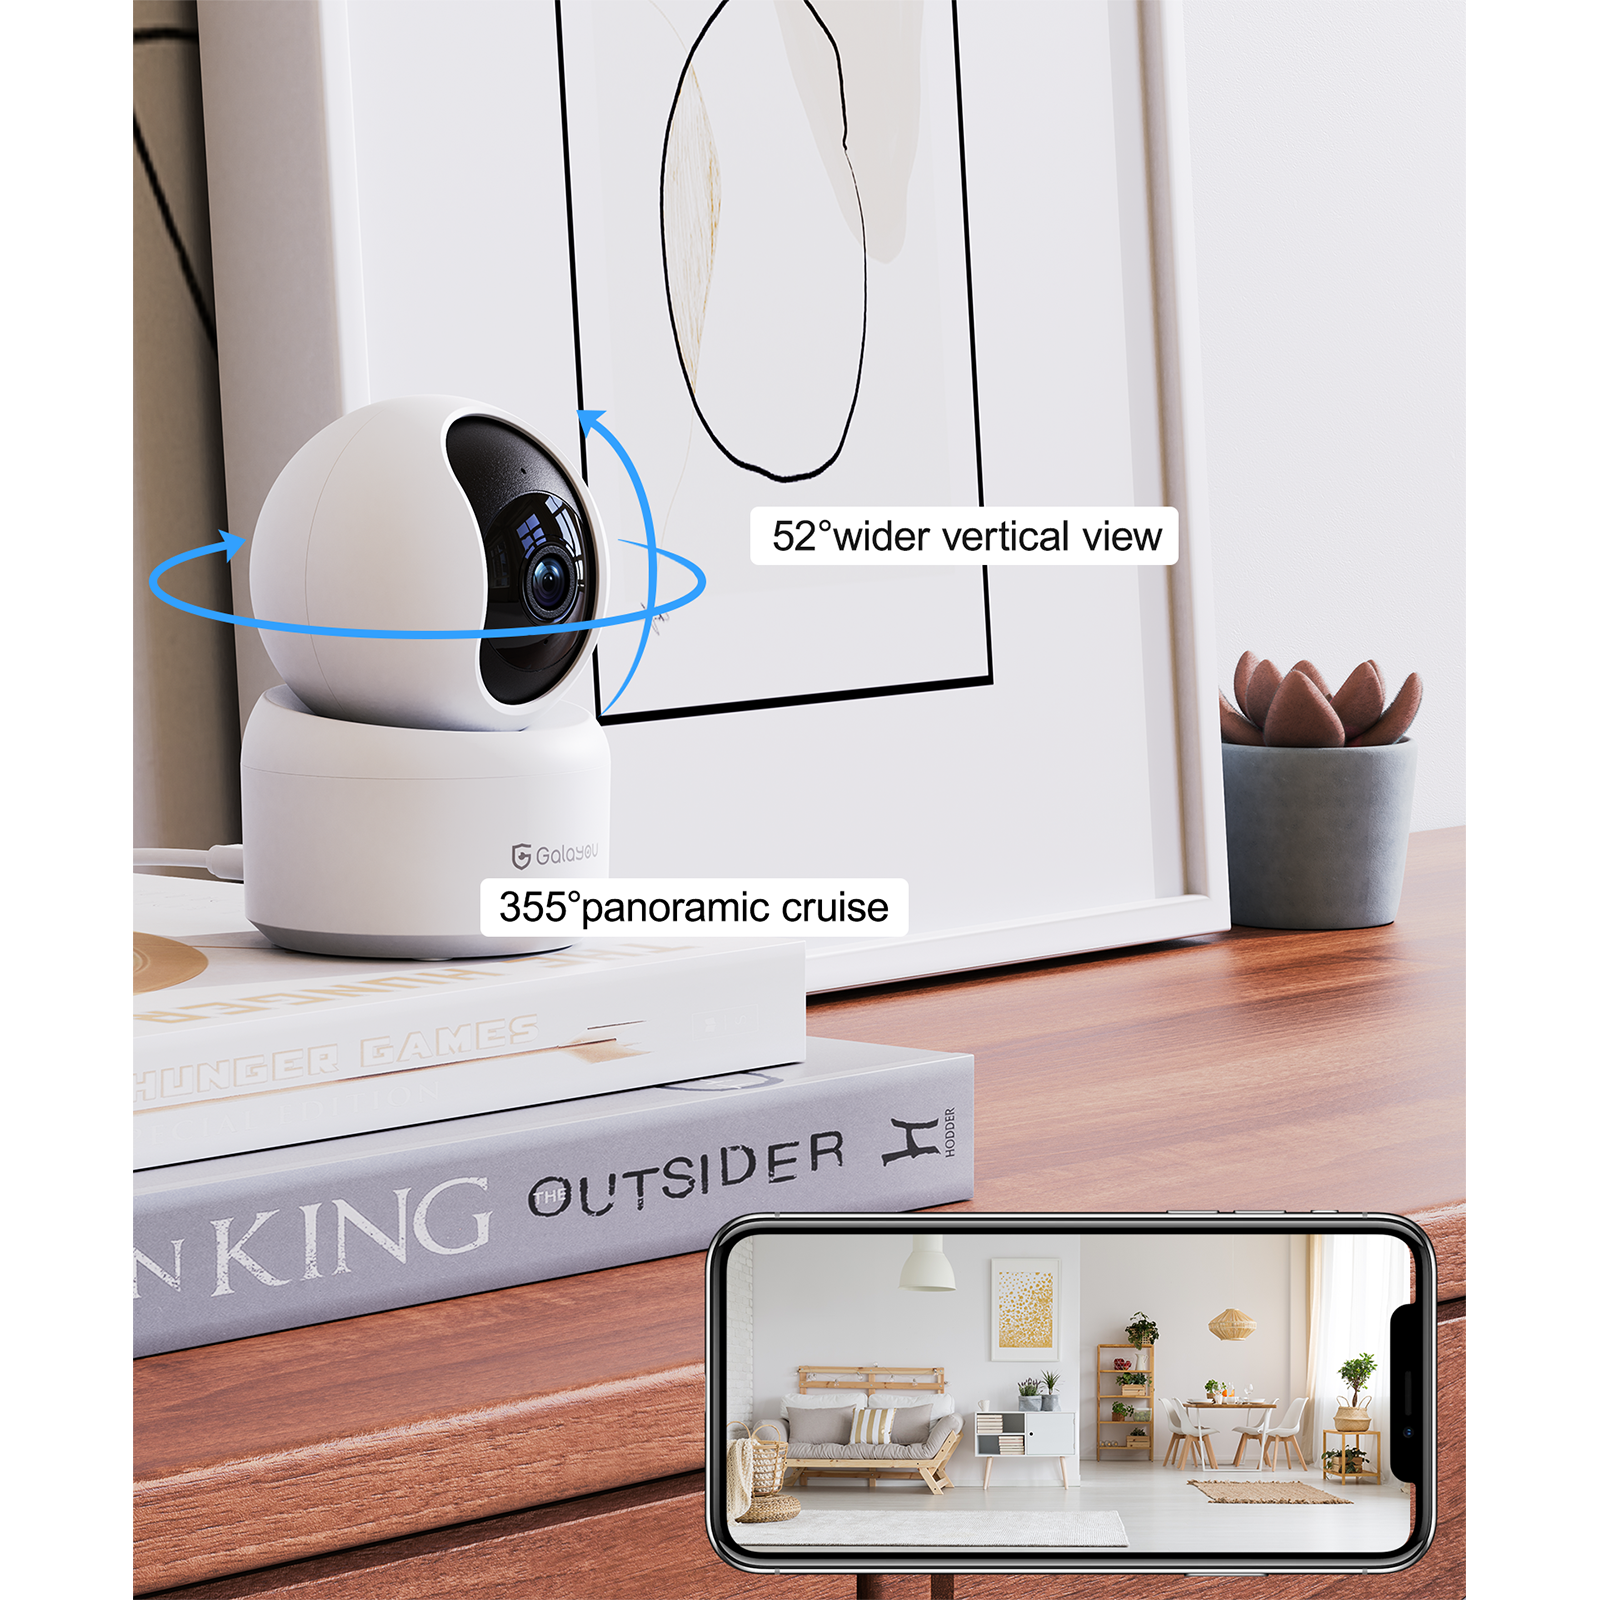 Galayou 2K Indoor Security Camera for Home with Wireless WiFi